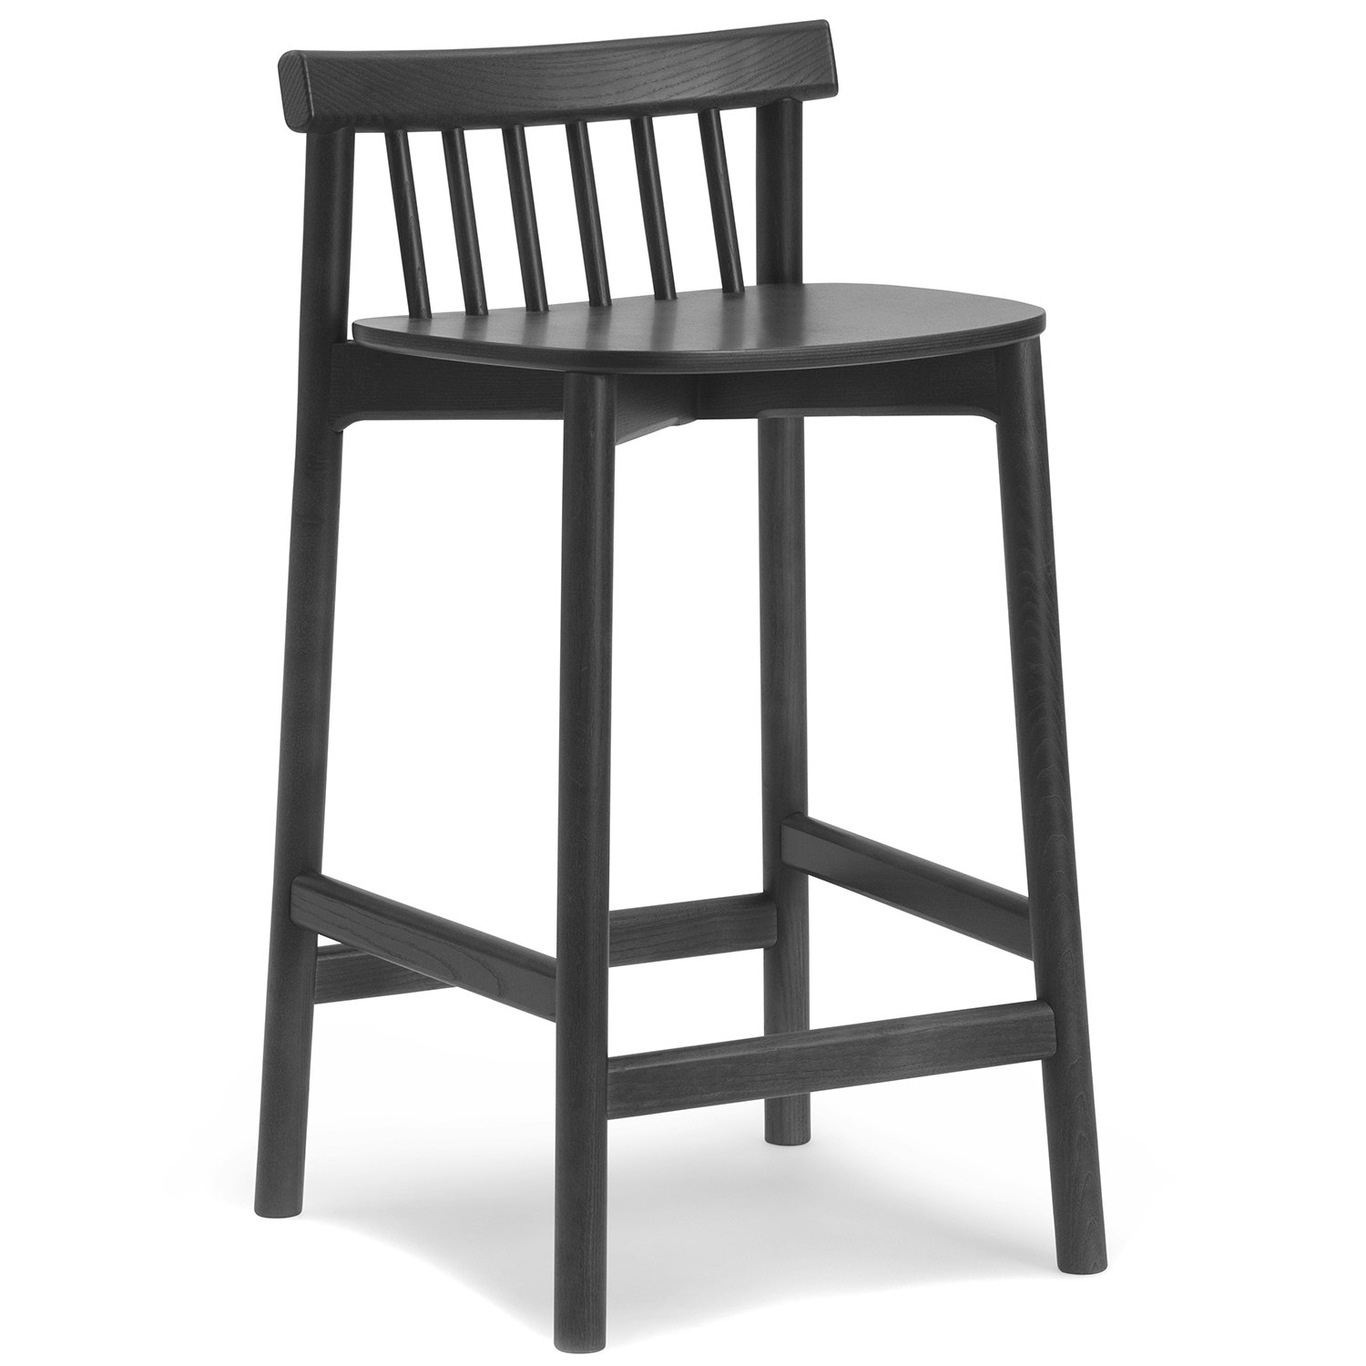 Pind Bar Stool 65 cm, Black Stained Ash